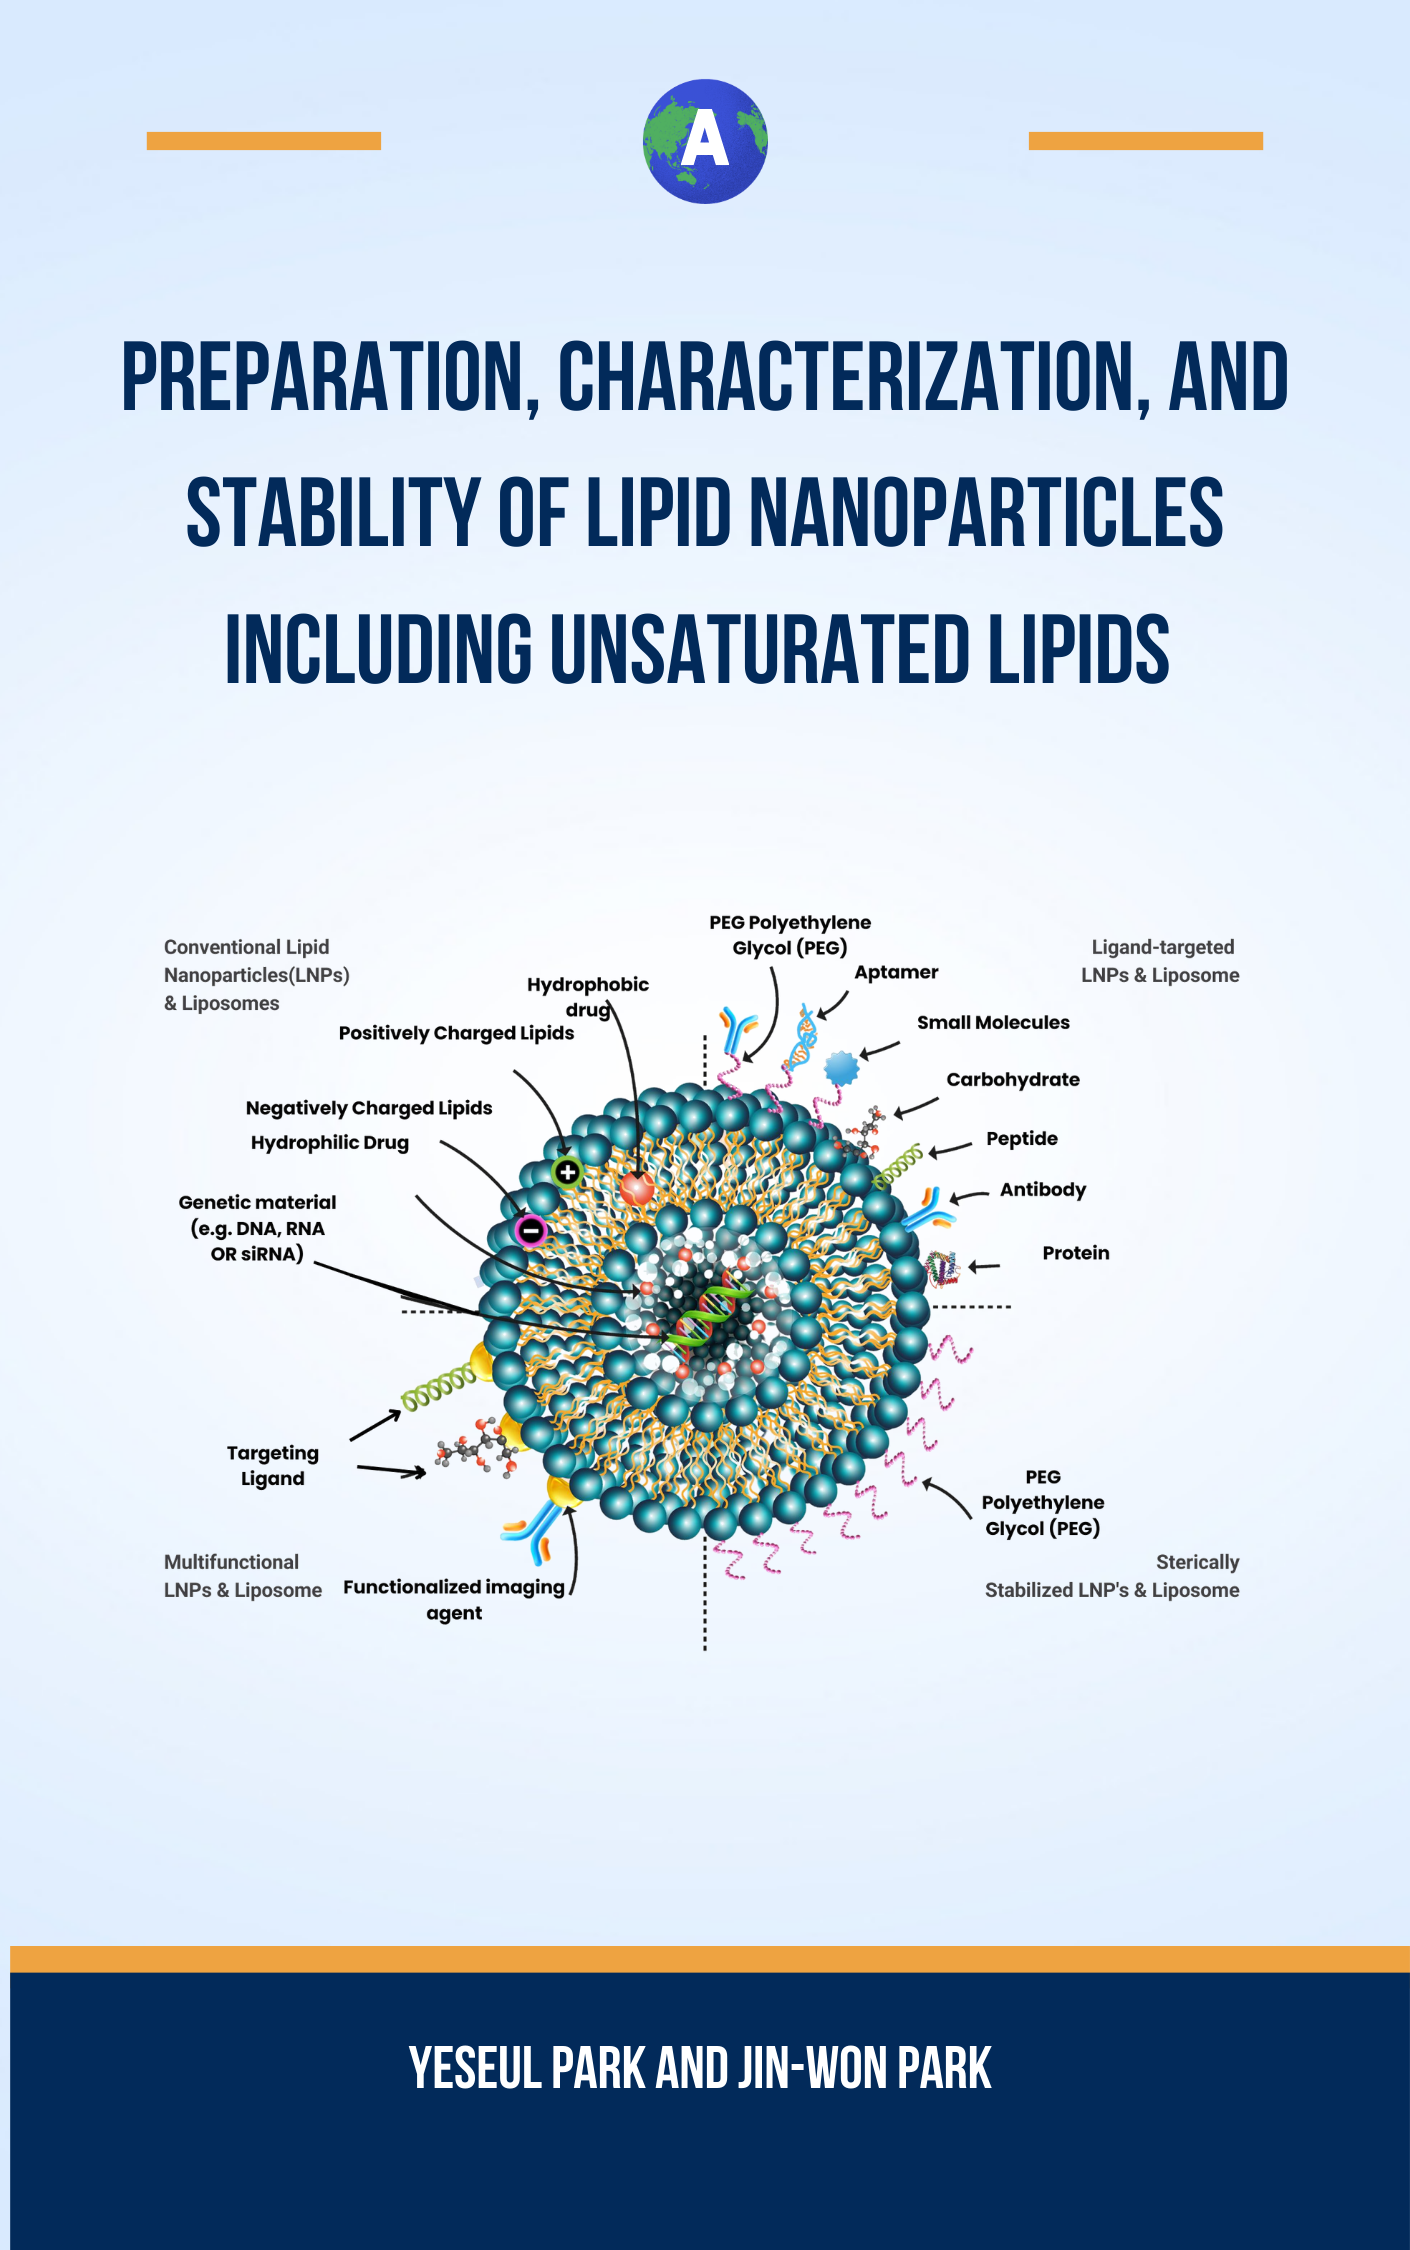 Preparation, characterization, and stability of lipid nanoparticles including unsaturated lipids